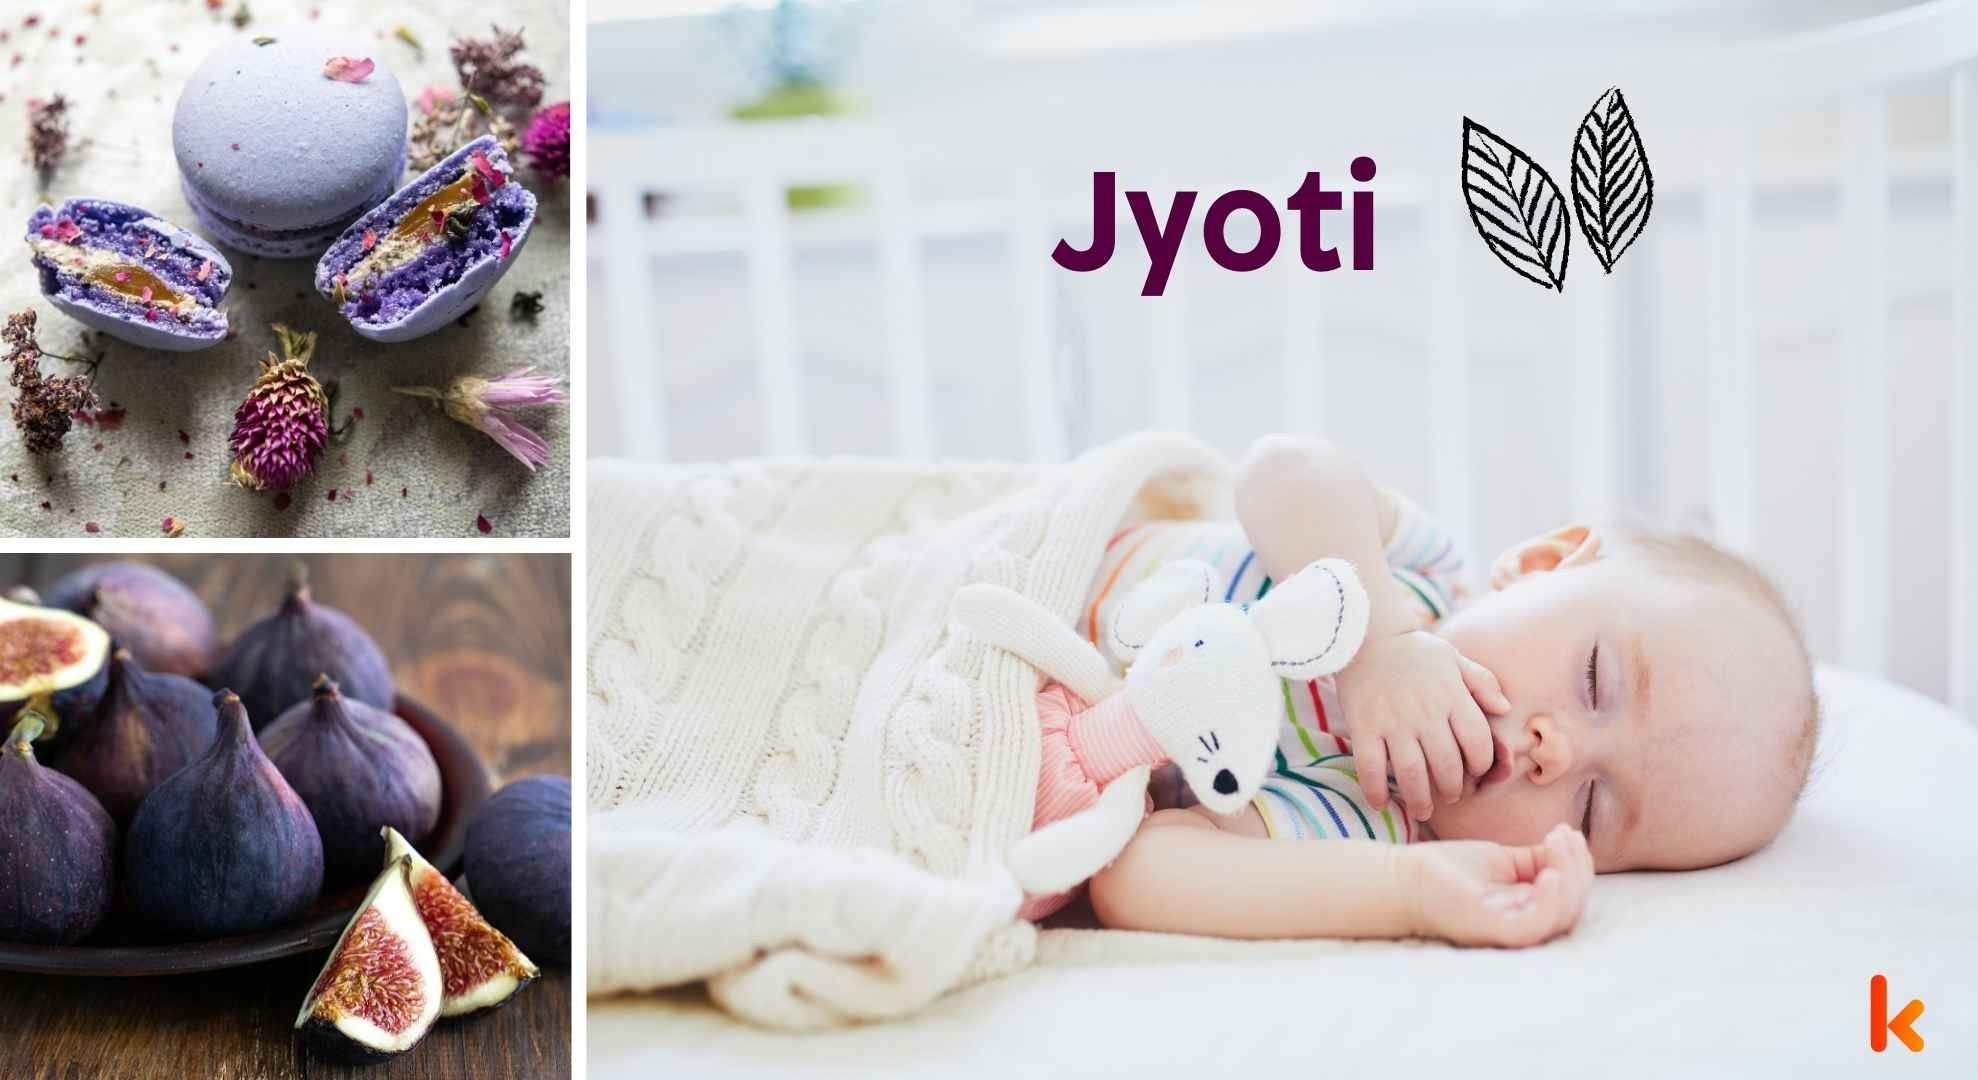 Meaning of the name Jyoti